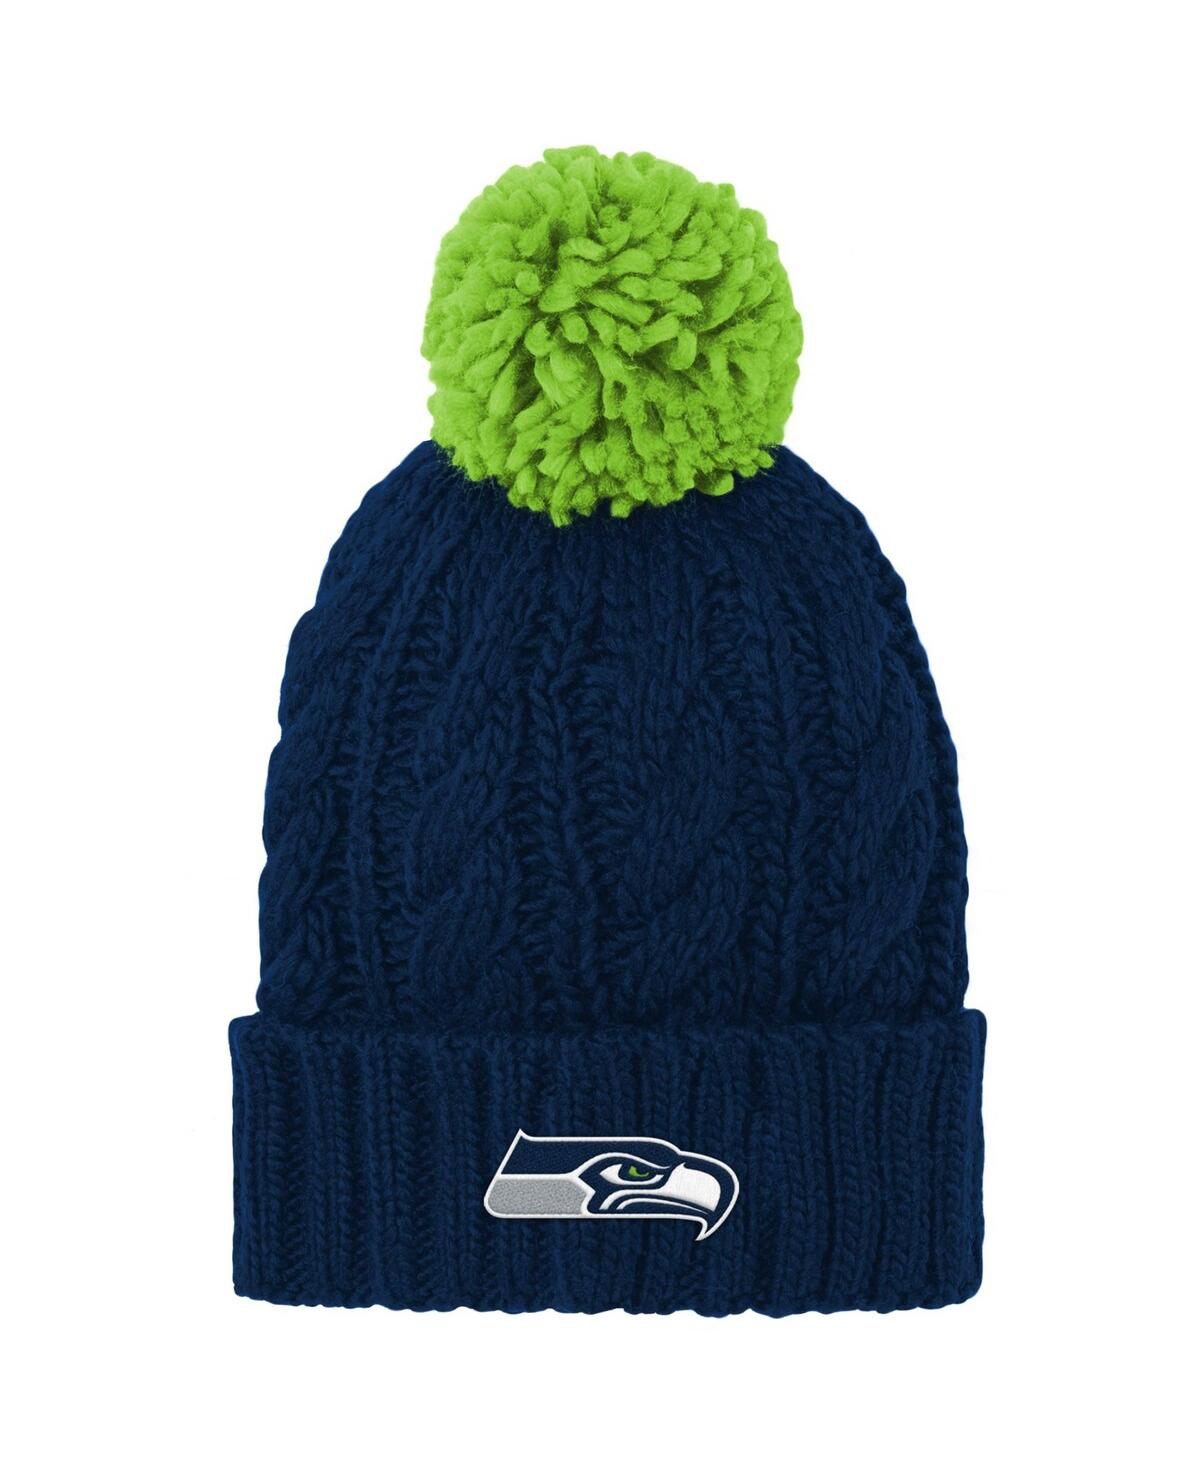 Outerstuff Kids' Big Girls College Navy Seattle Seahawks Cable Cuffed Knit Hat With Pom